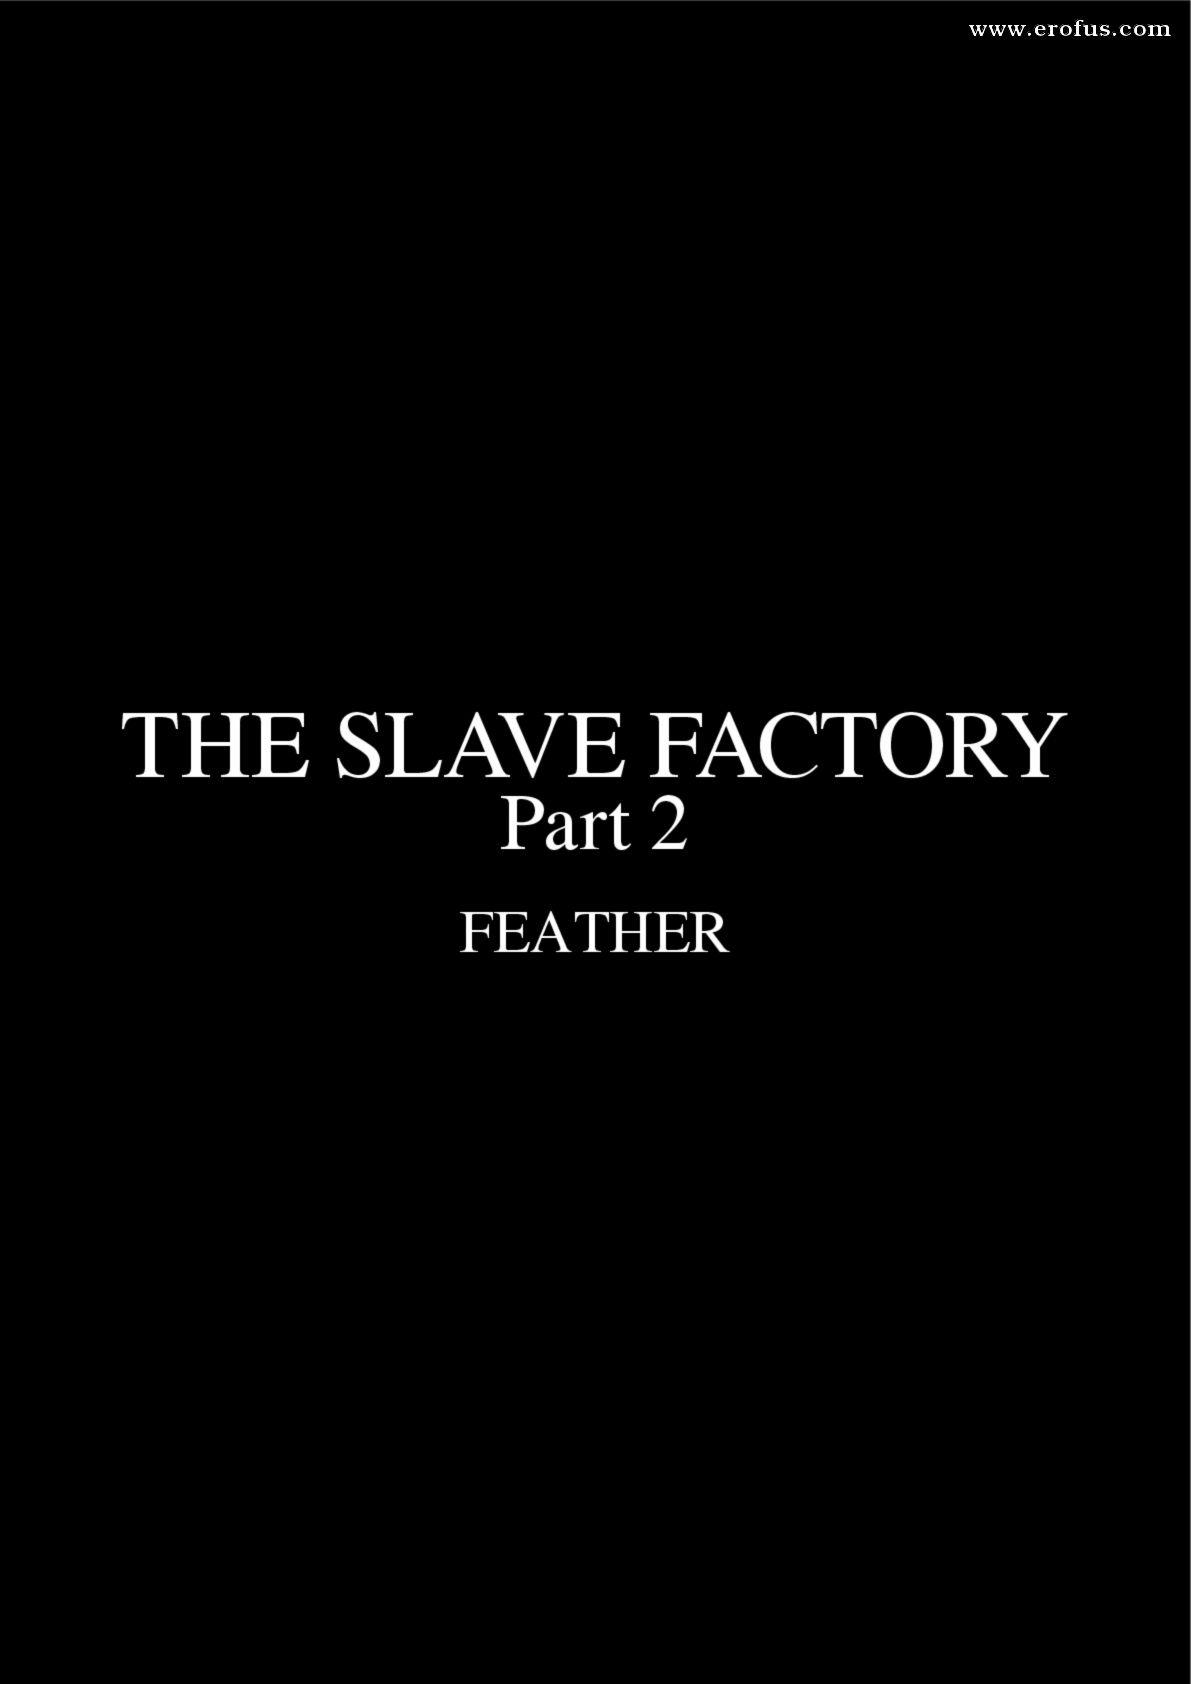 picture Fansadox-386---FEATHER---Slave-Factory-2-0-007.jpg